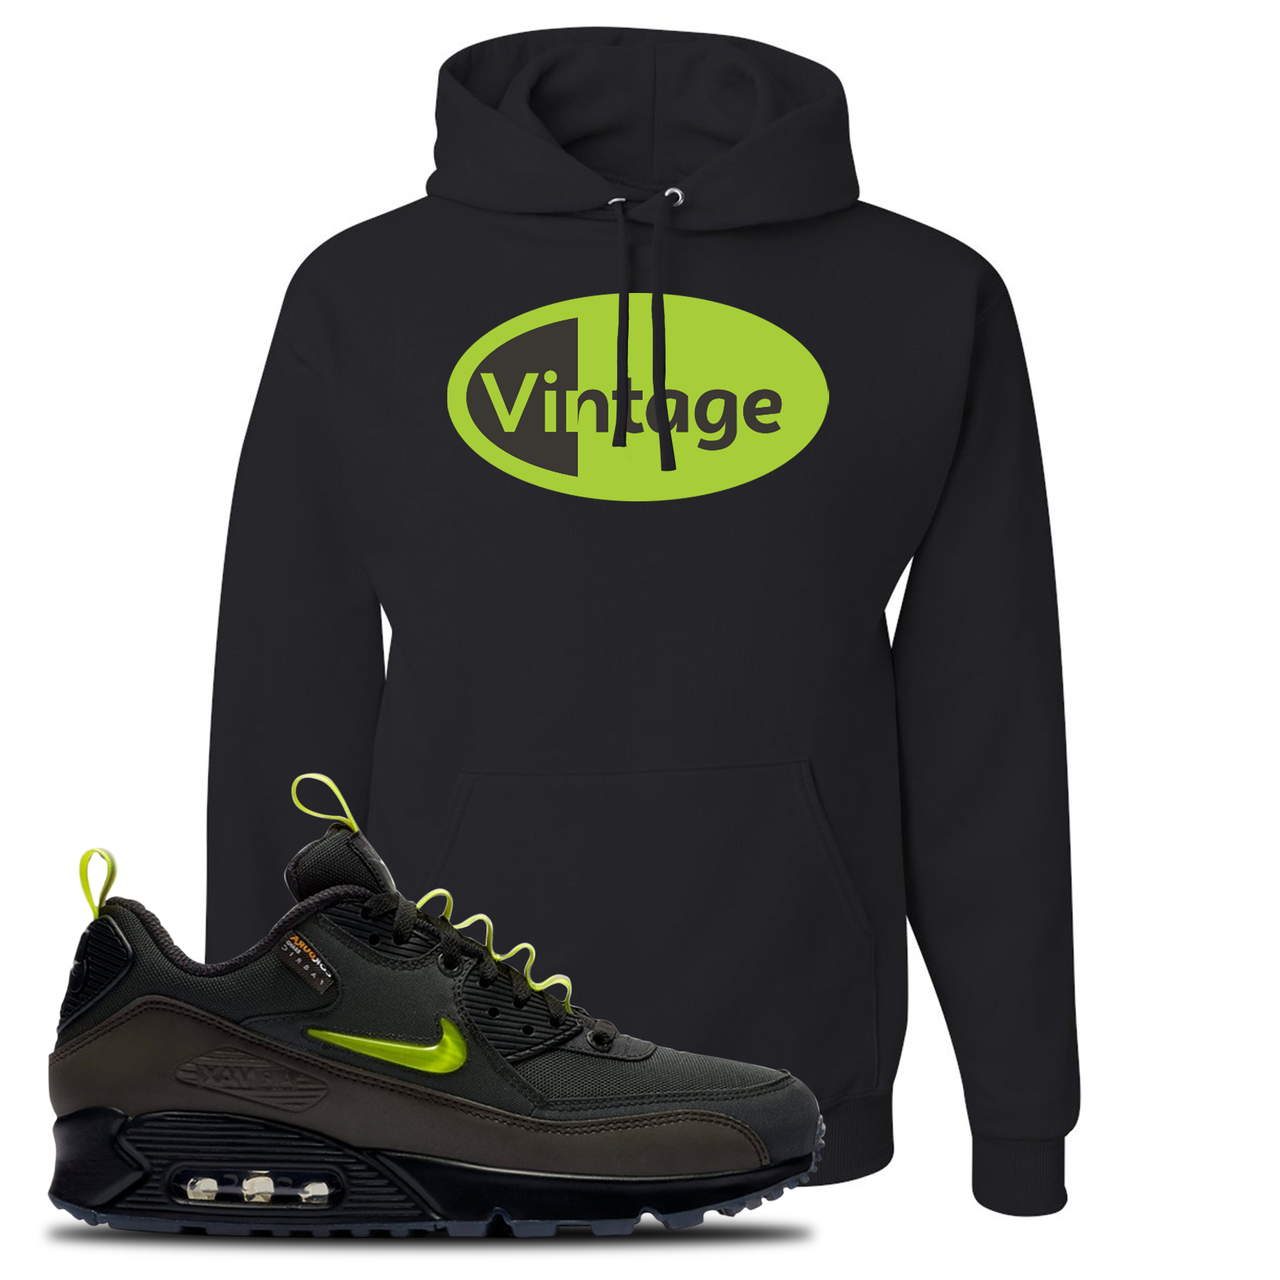 The Basement X Air Max 90 Manchester Vintage Oval Black Sneaker Hook Up Pullover Hoodie